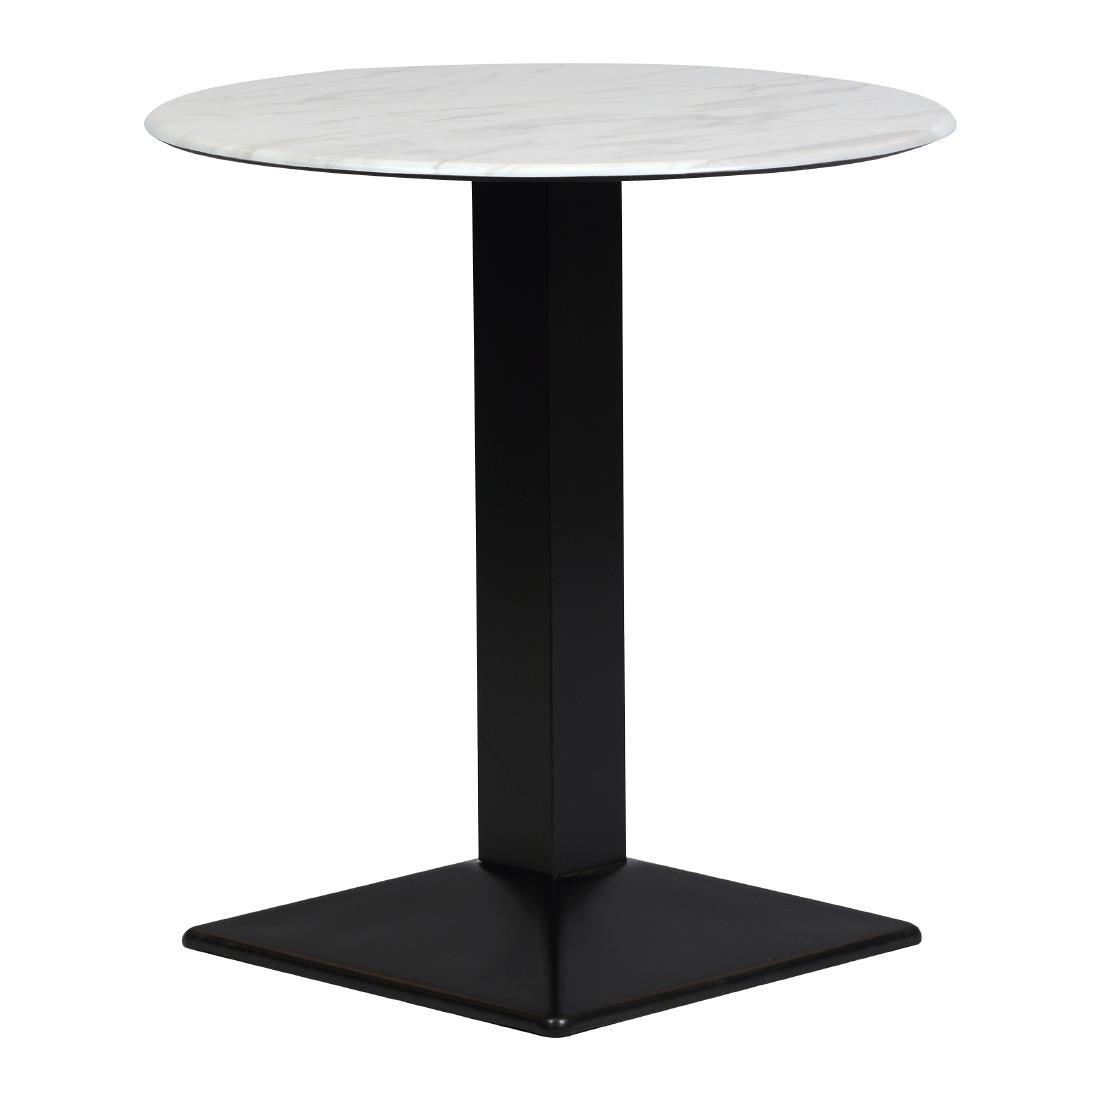 CZ818 Turin Metal Base Round Dining Table with Laminate Top Marble 600mm JD Catering Equipment Solutions Ltd